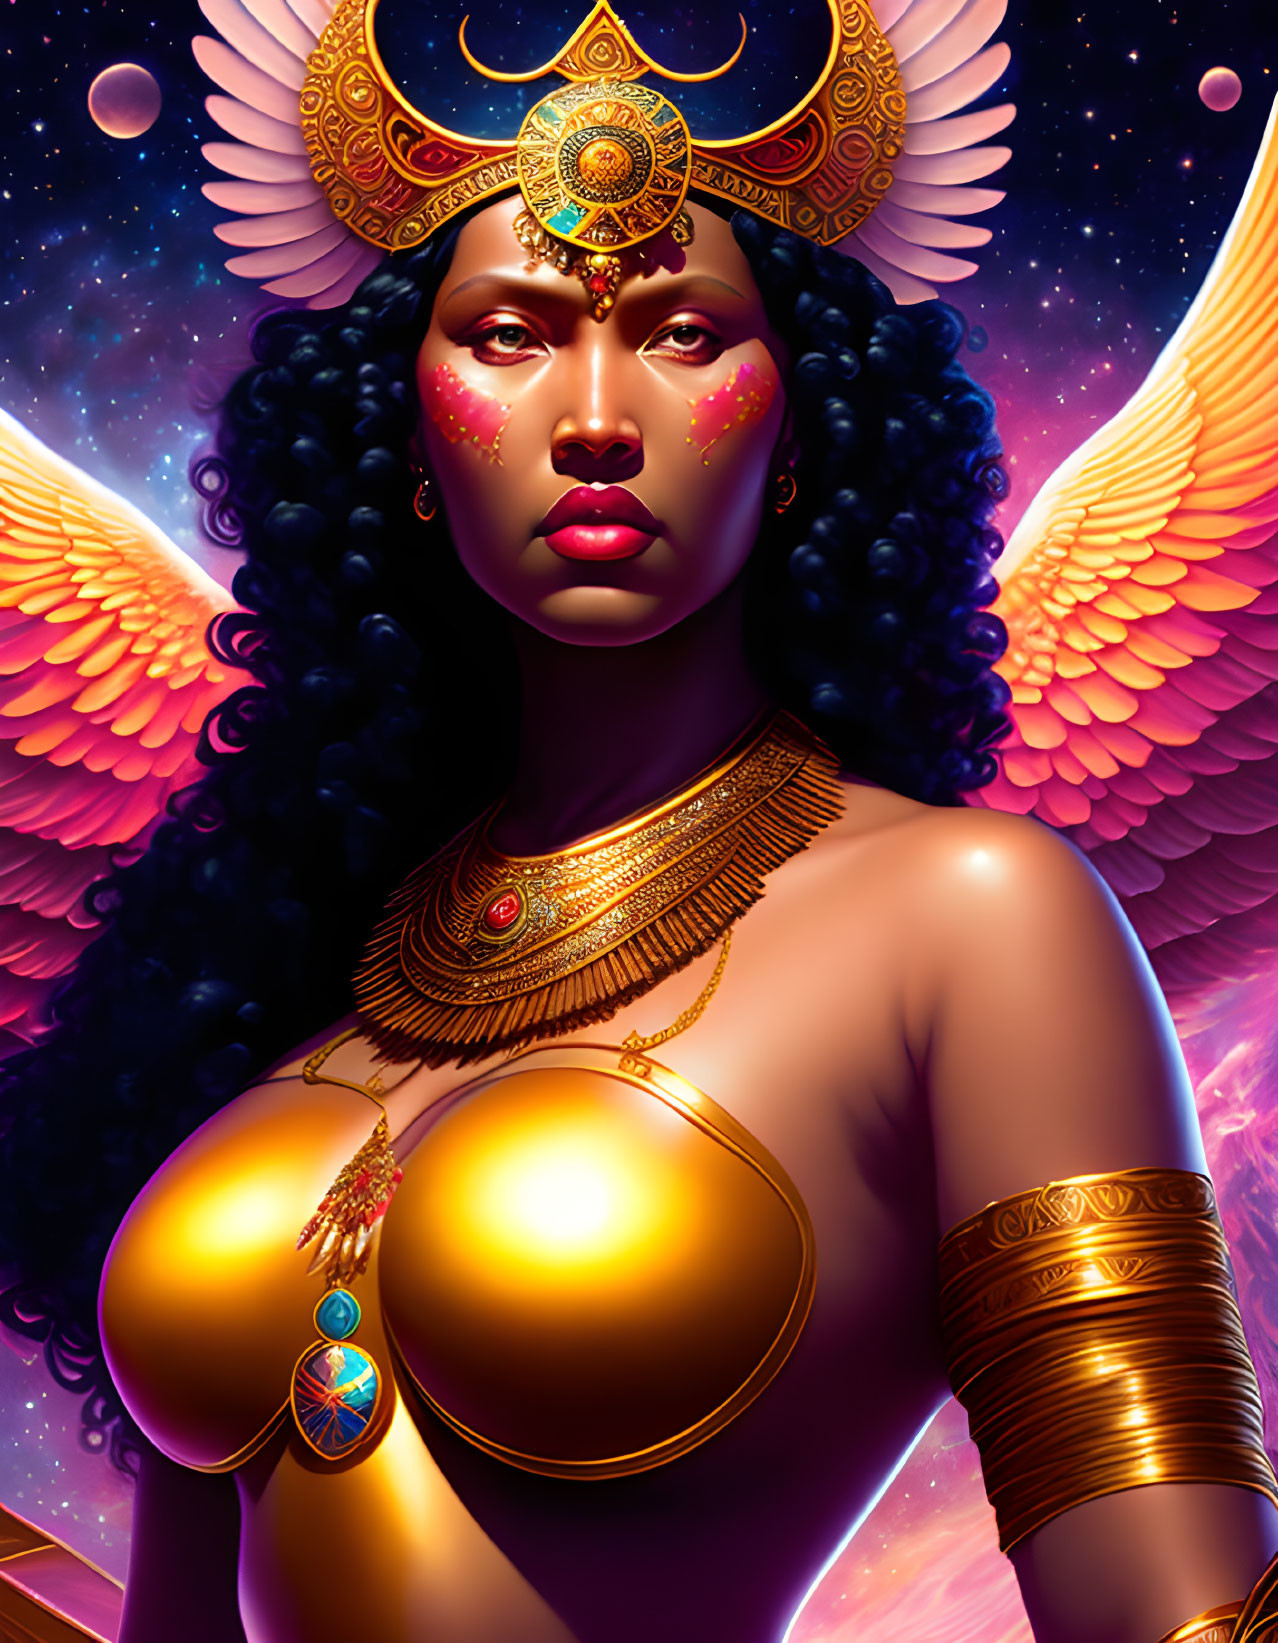 Majestic woman with wings in Egyptian-inspired attire on cosmic backdrop